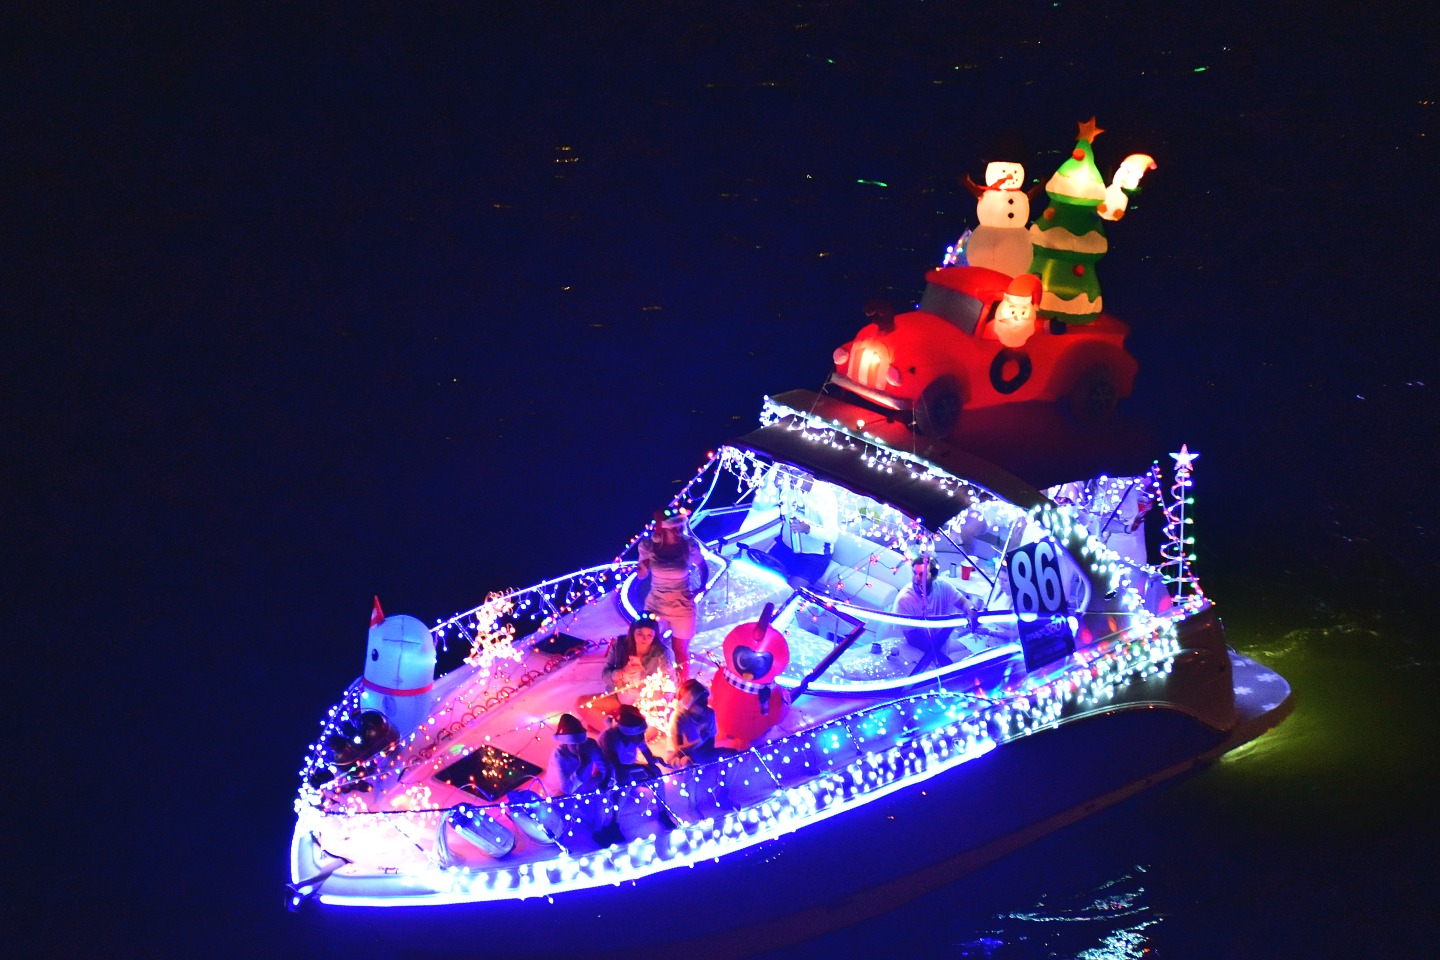 Closing Time, boat number 86 in the 2021 Winterfest Boat Parade